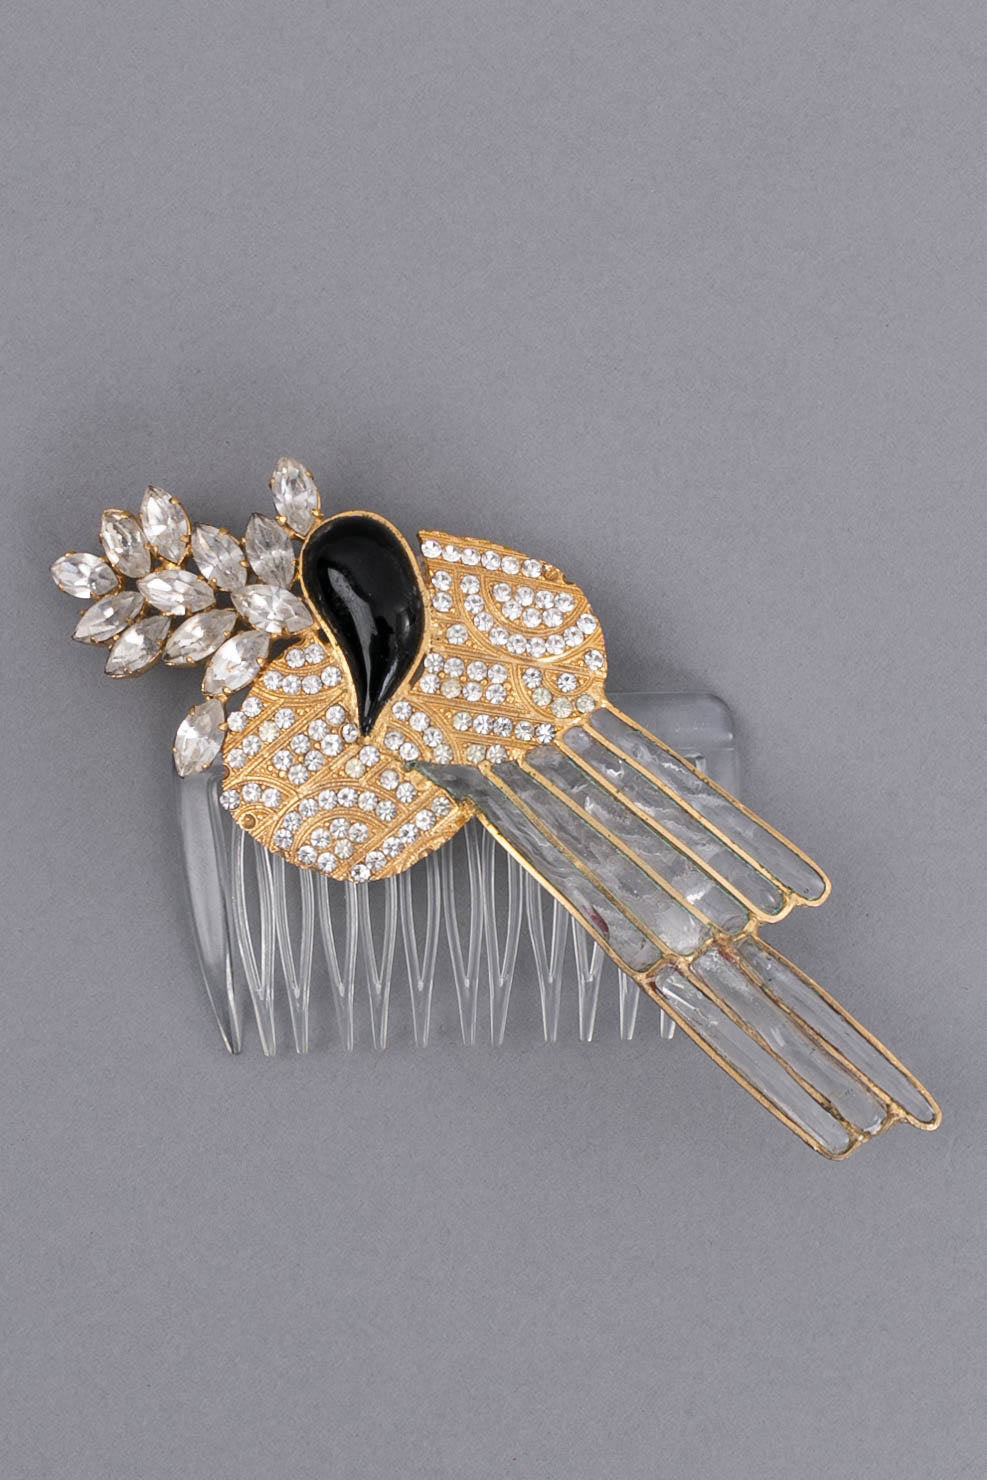 Comb in gilded metal and glass paste